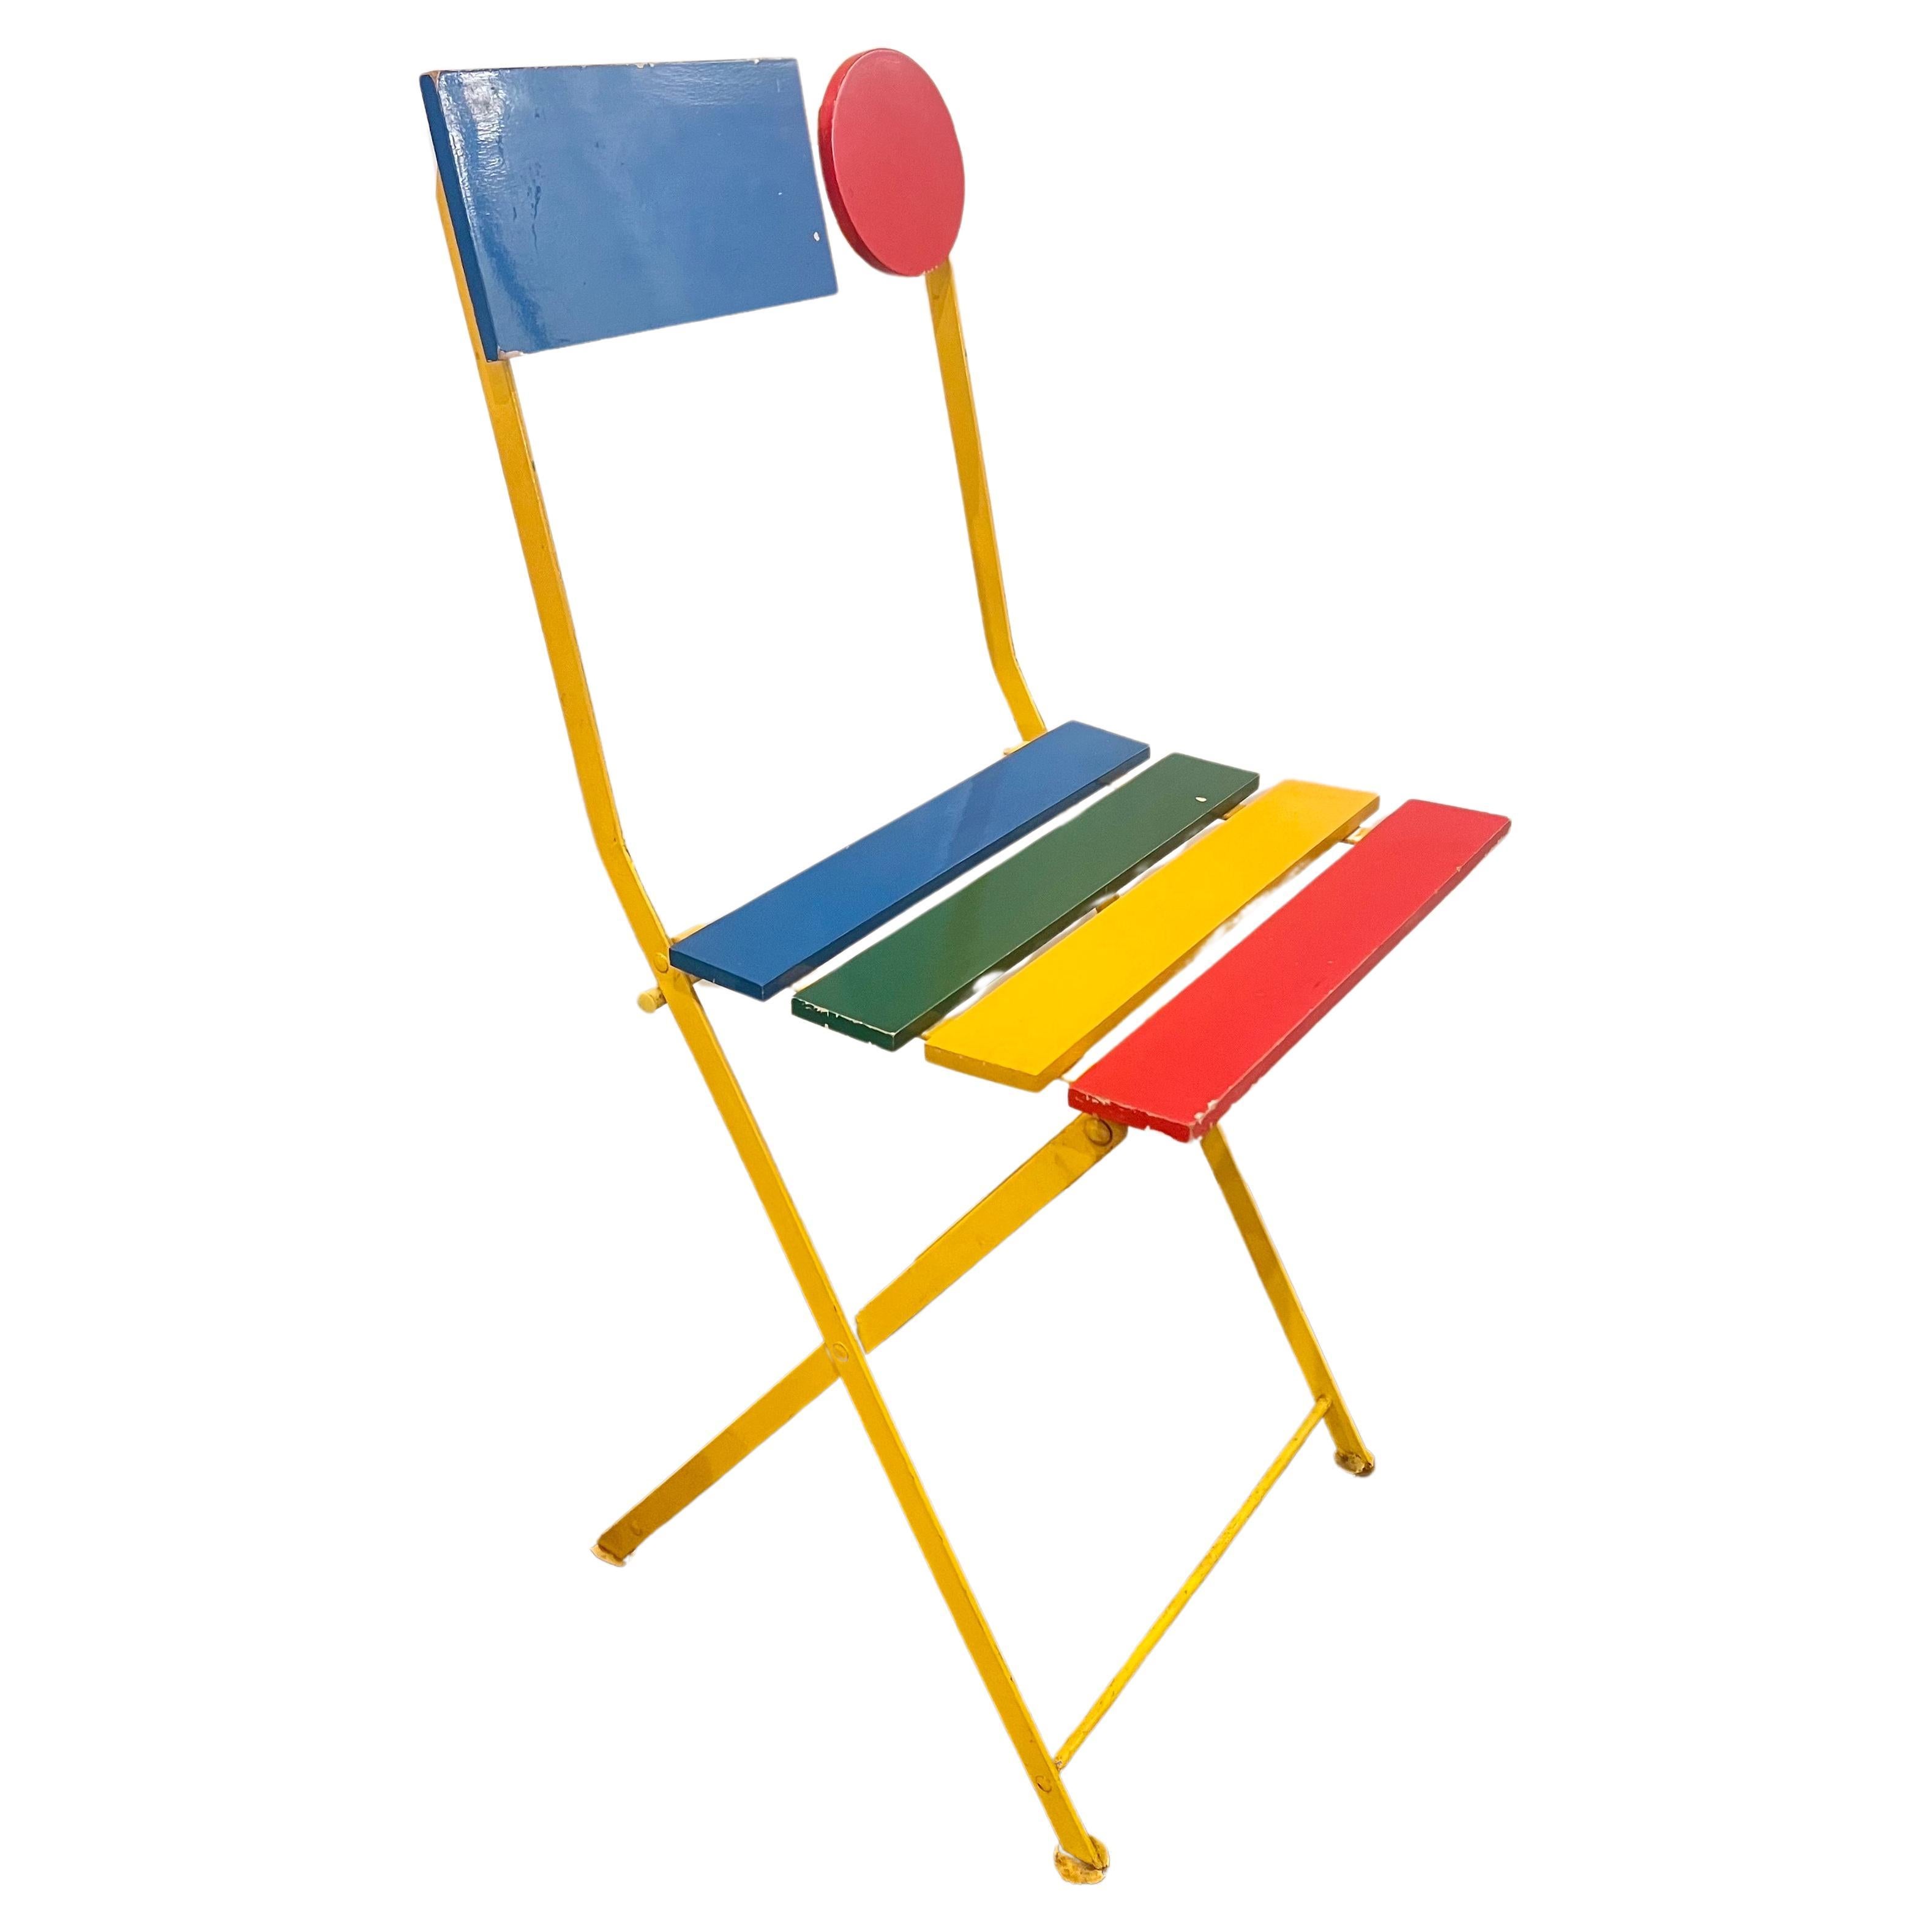 Whimsical folding chair rare hard to find, Lacquered steel frame with plastic rollers for folding, seat and back of lacquered wood slats. Designed by Denis Balland for Fermob, France, c. 1985. Great as a side chair it is a sculpture by itself solid